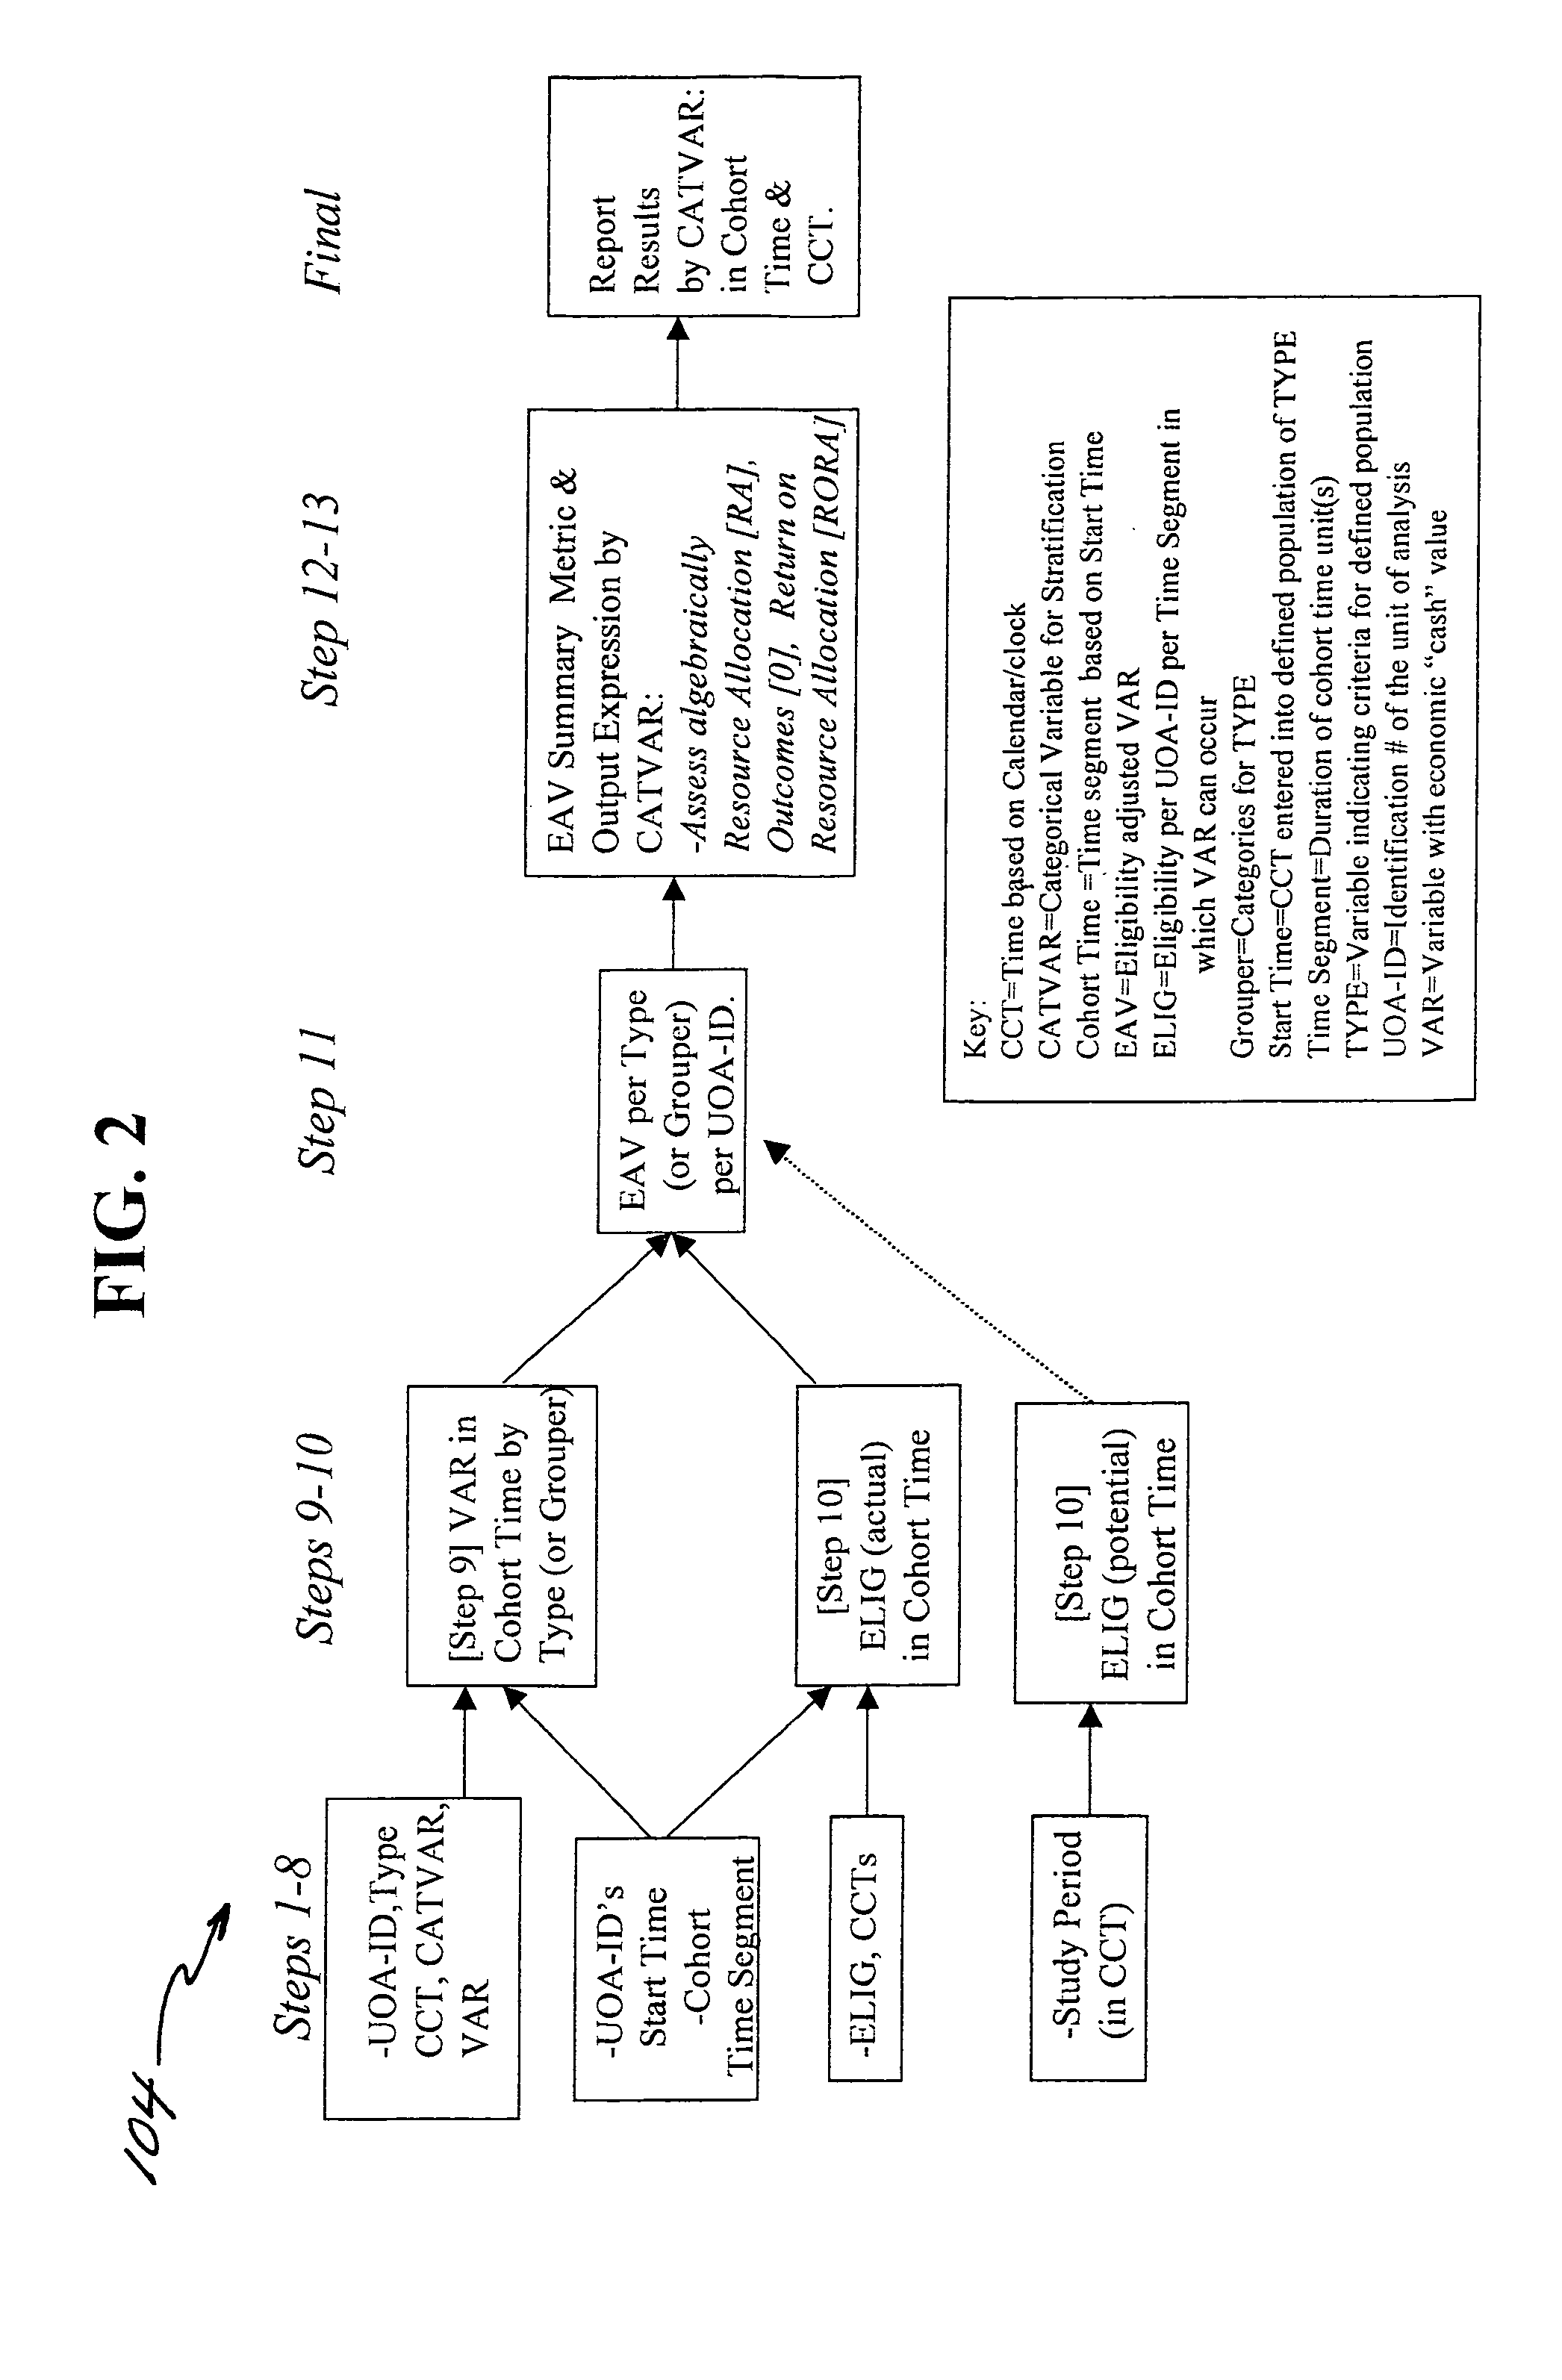 Method and system for analyzing resource allocation based on cohort times